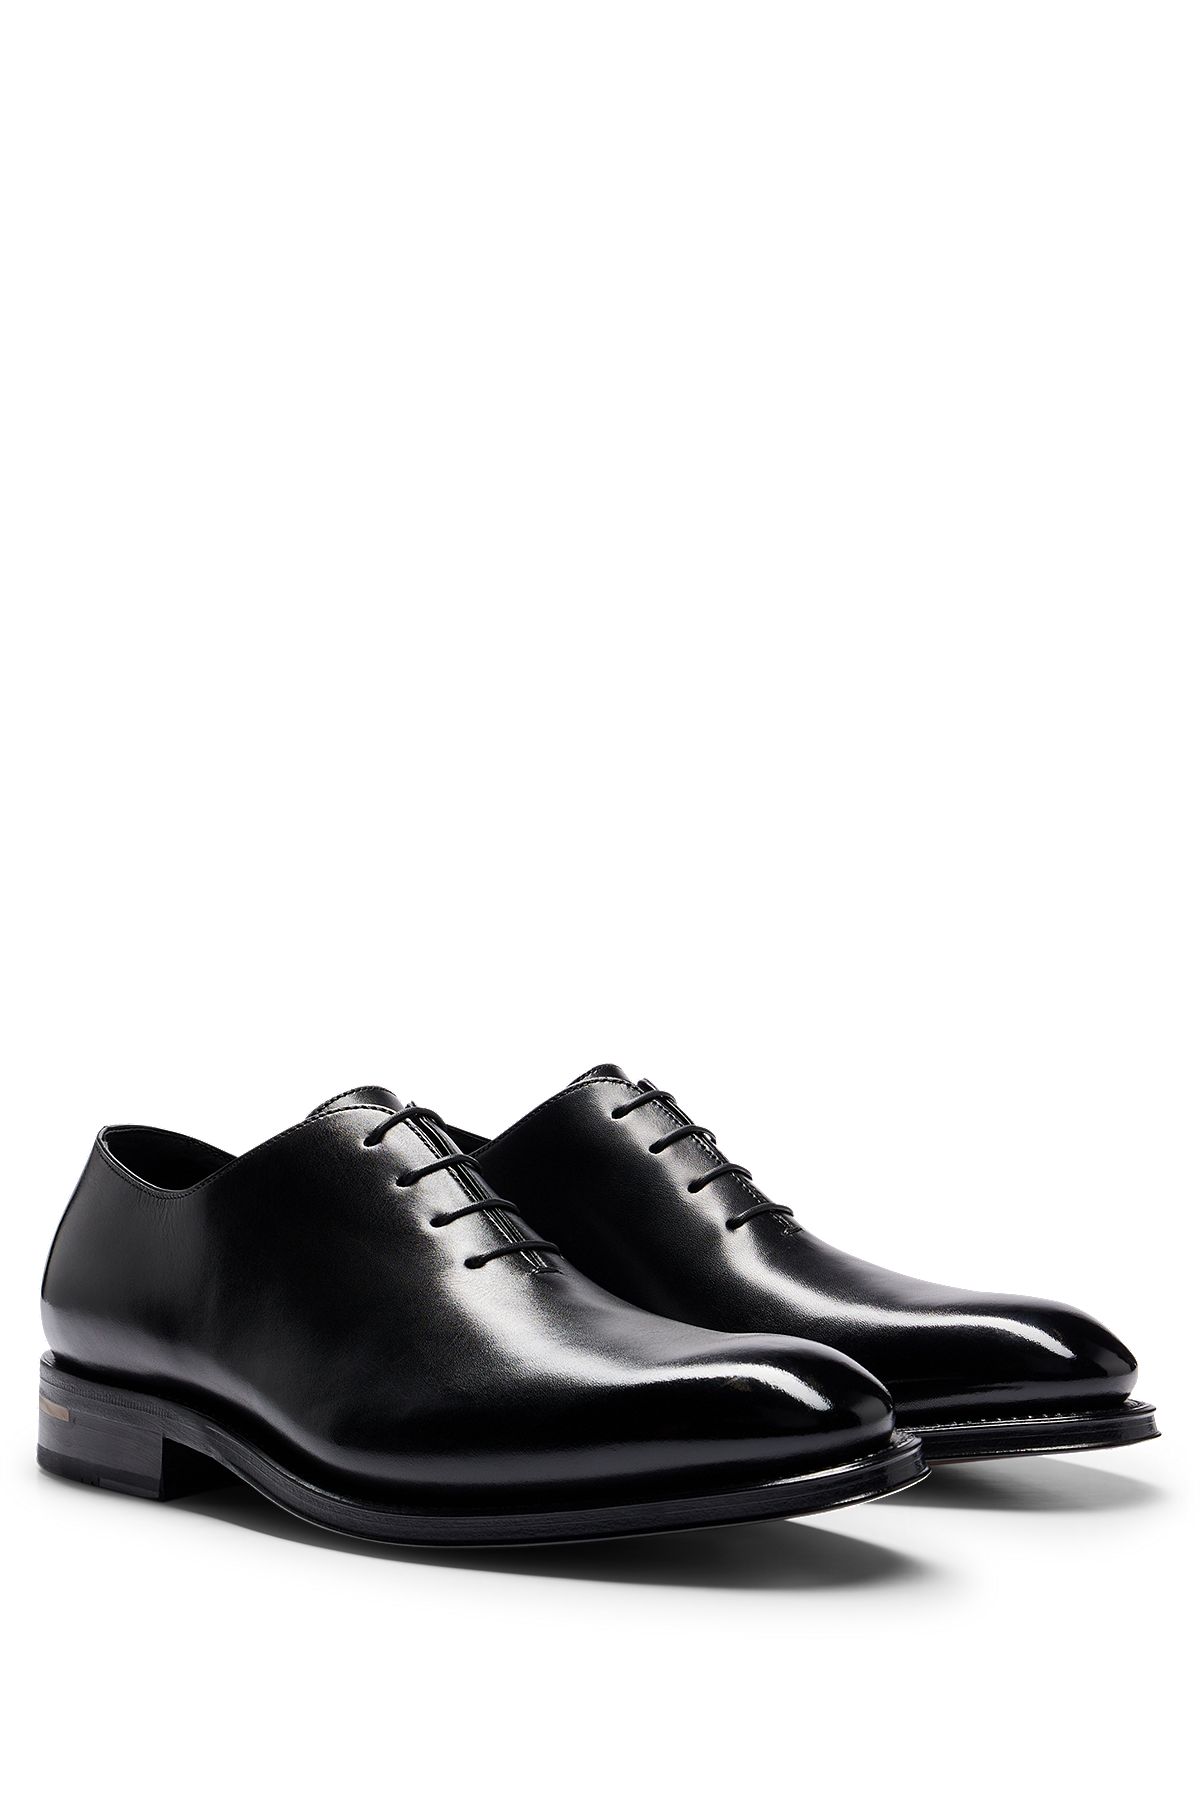 Leather Oxford shoes with burnished effect, Black